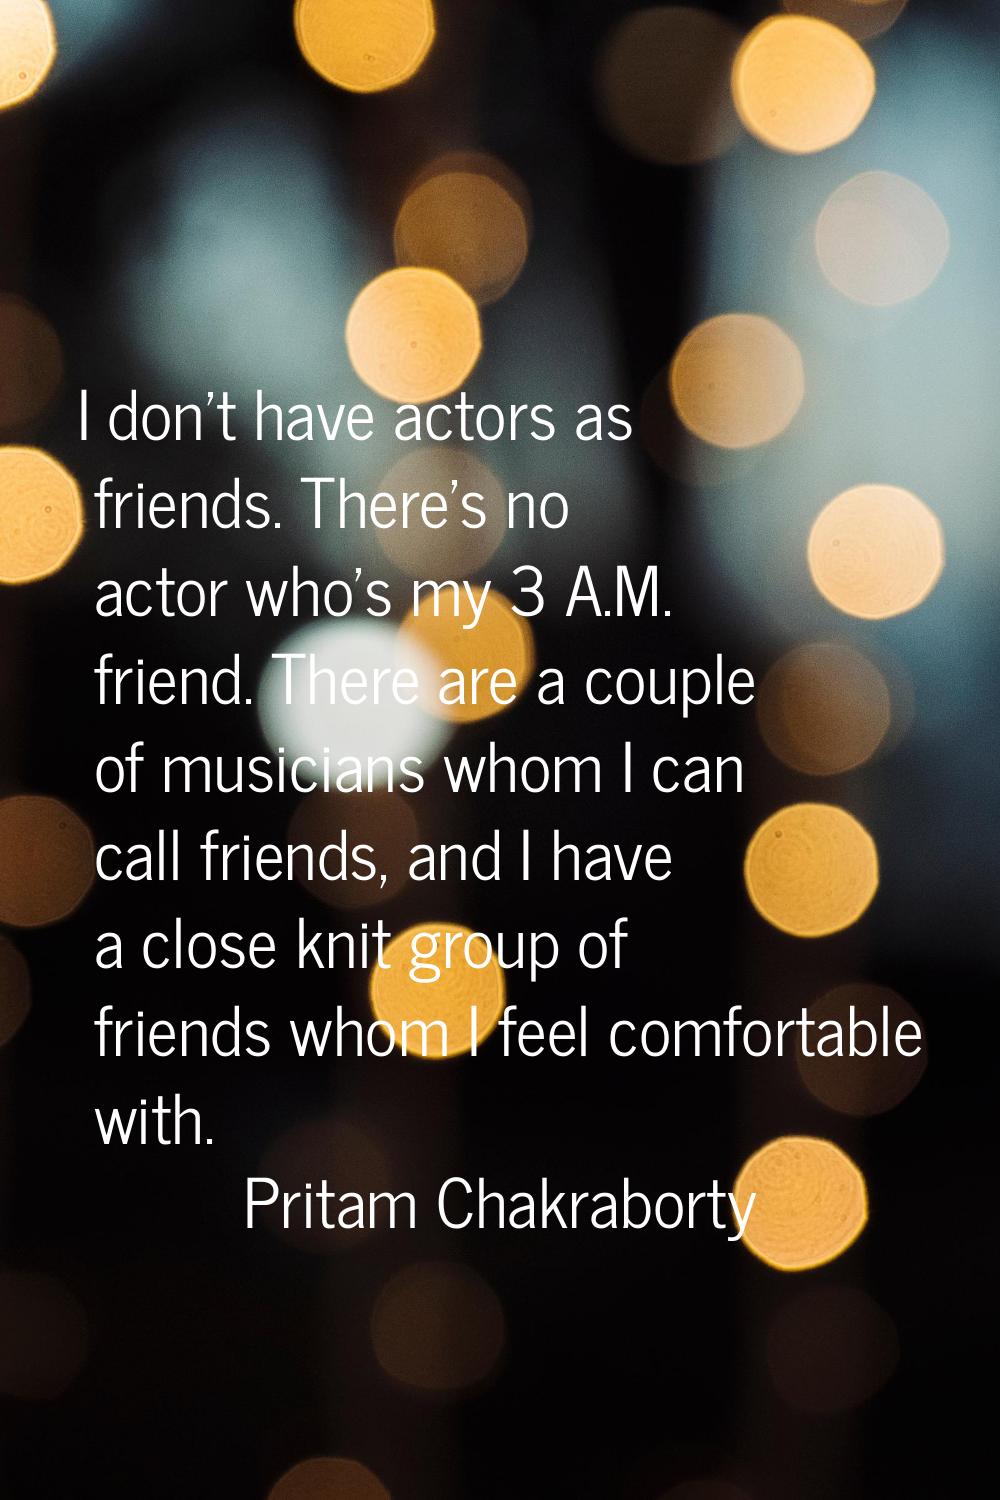 I don't have actors as friends. There's no actor who's my 3 A.M. friend. There are a couple of musi